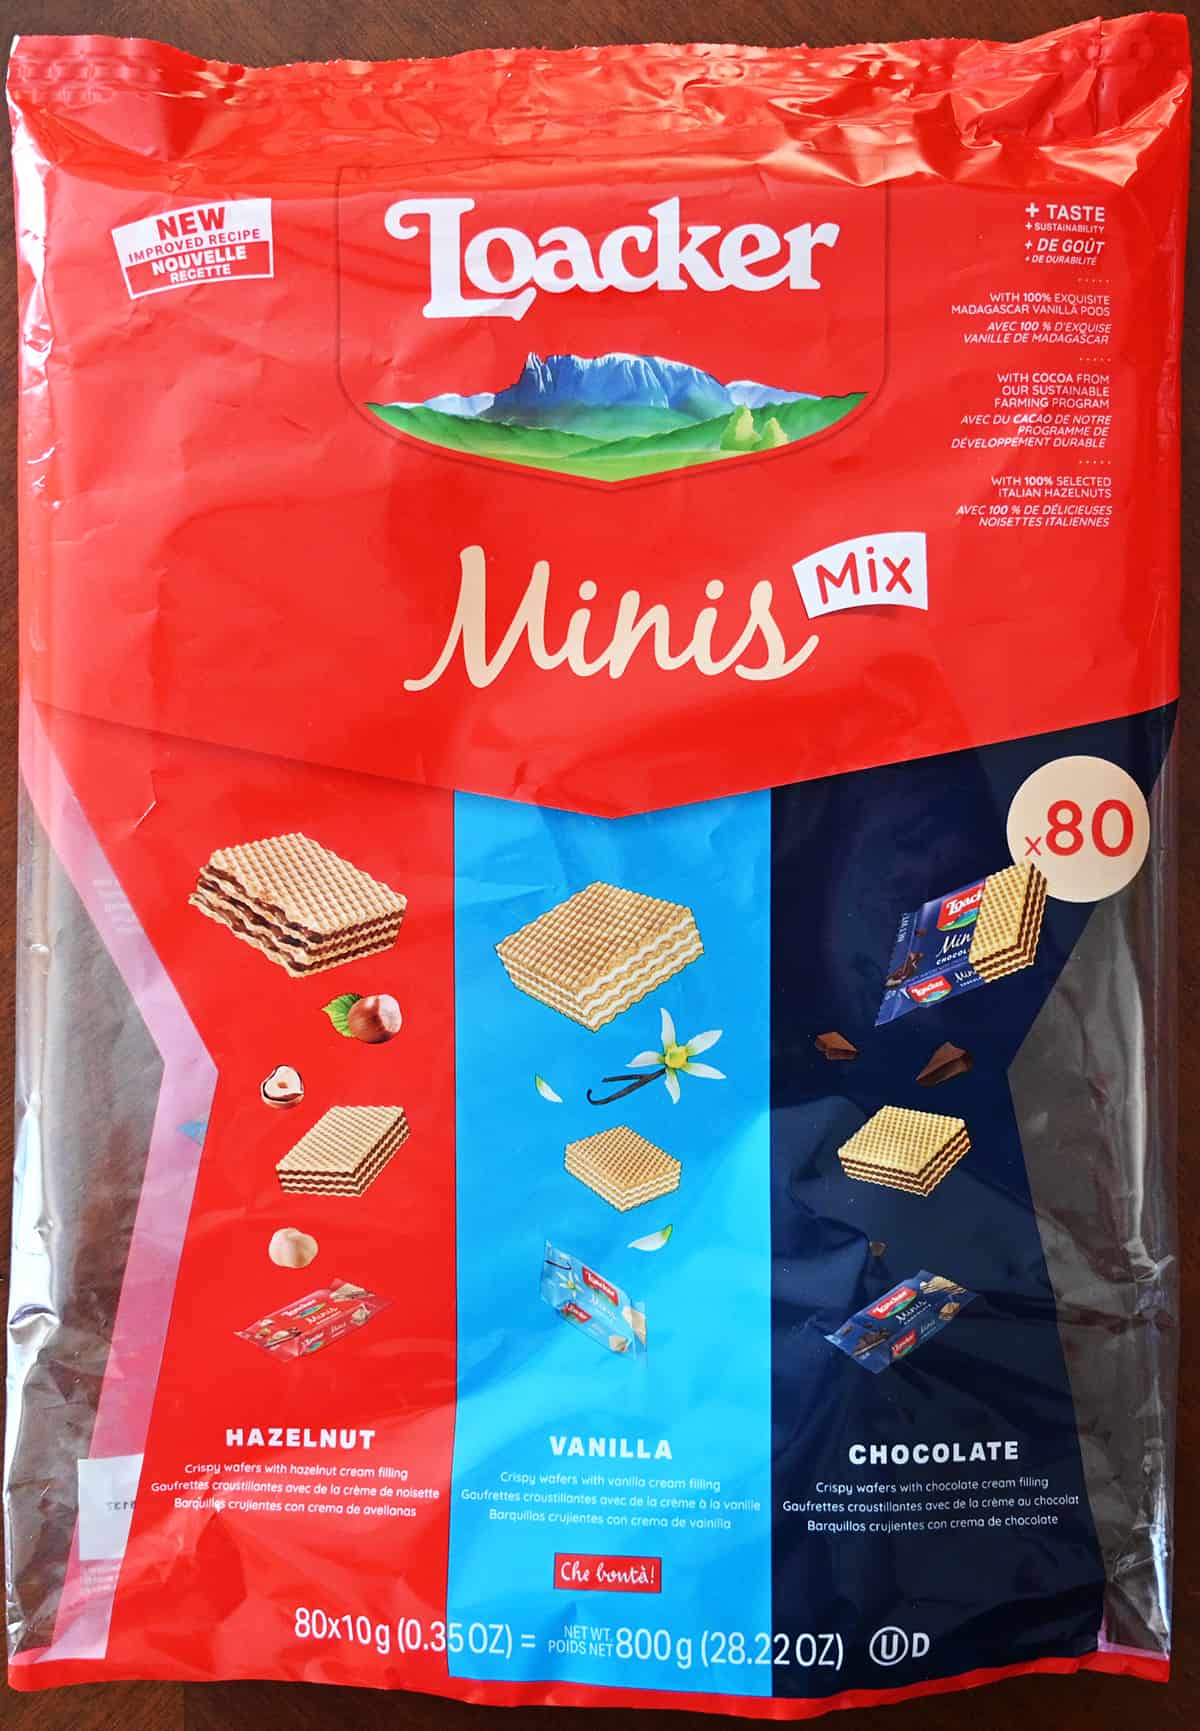 Closeup image of the front of bag of Loacker Minis Mix.